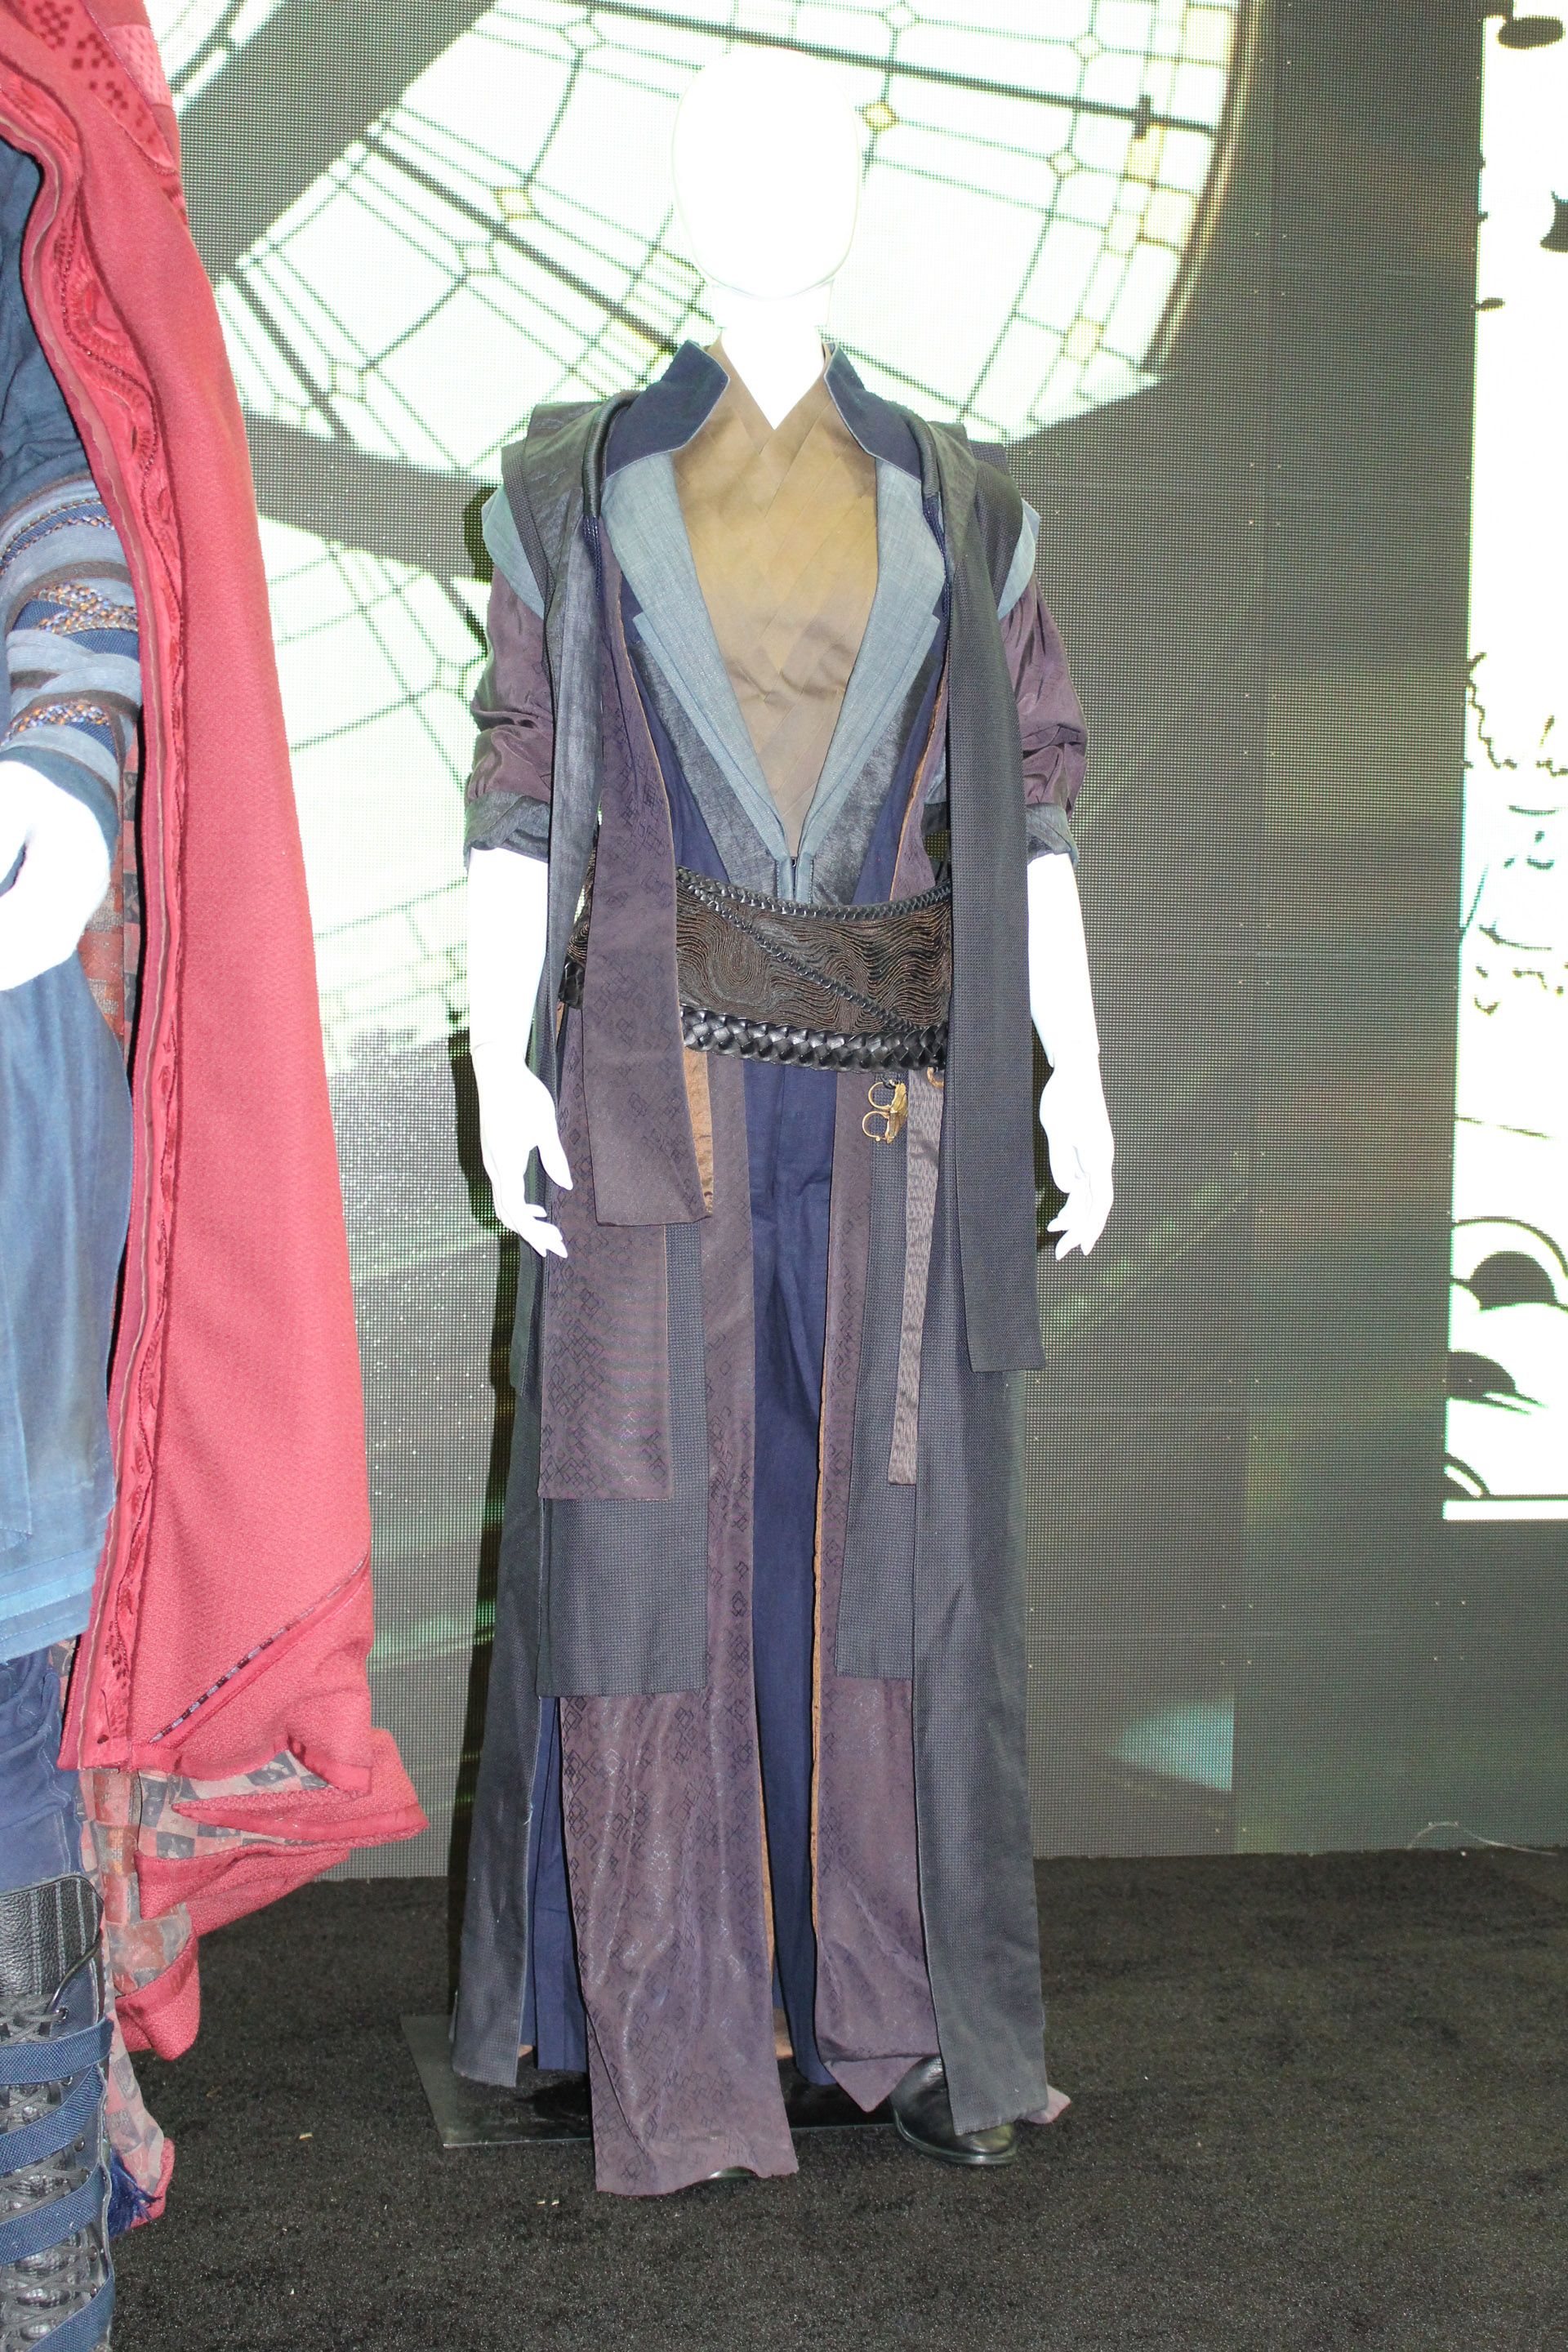 SDCC 2016 - The Ancient One Costume